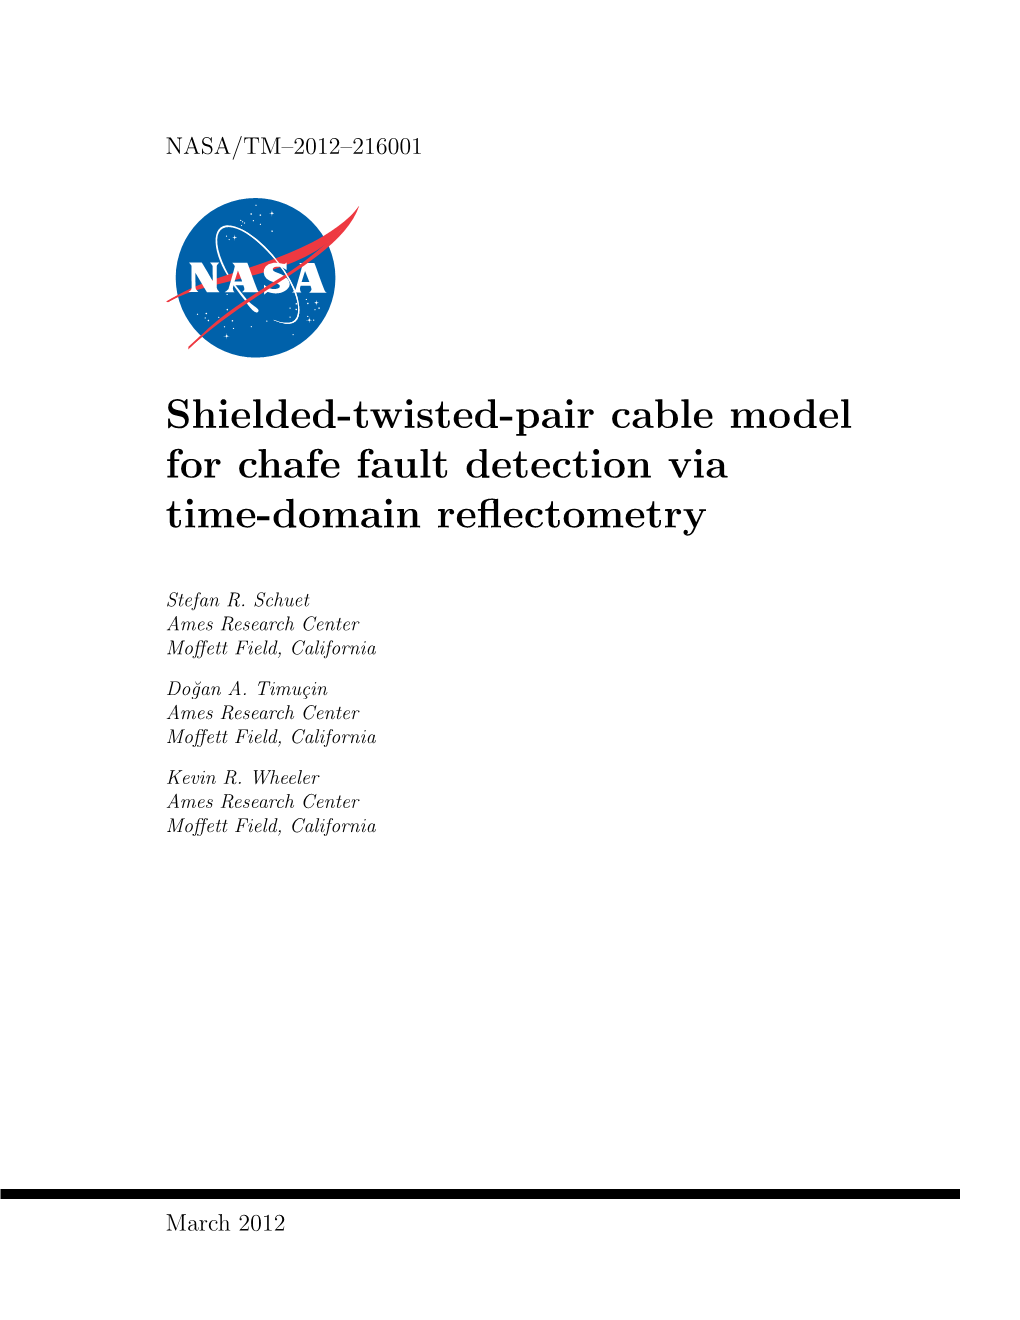 Shielded-Twisted-Pair Cable Model for Chafe Fault Detection Via Time-Domain Reﬂectometry